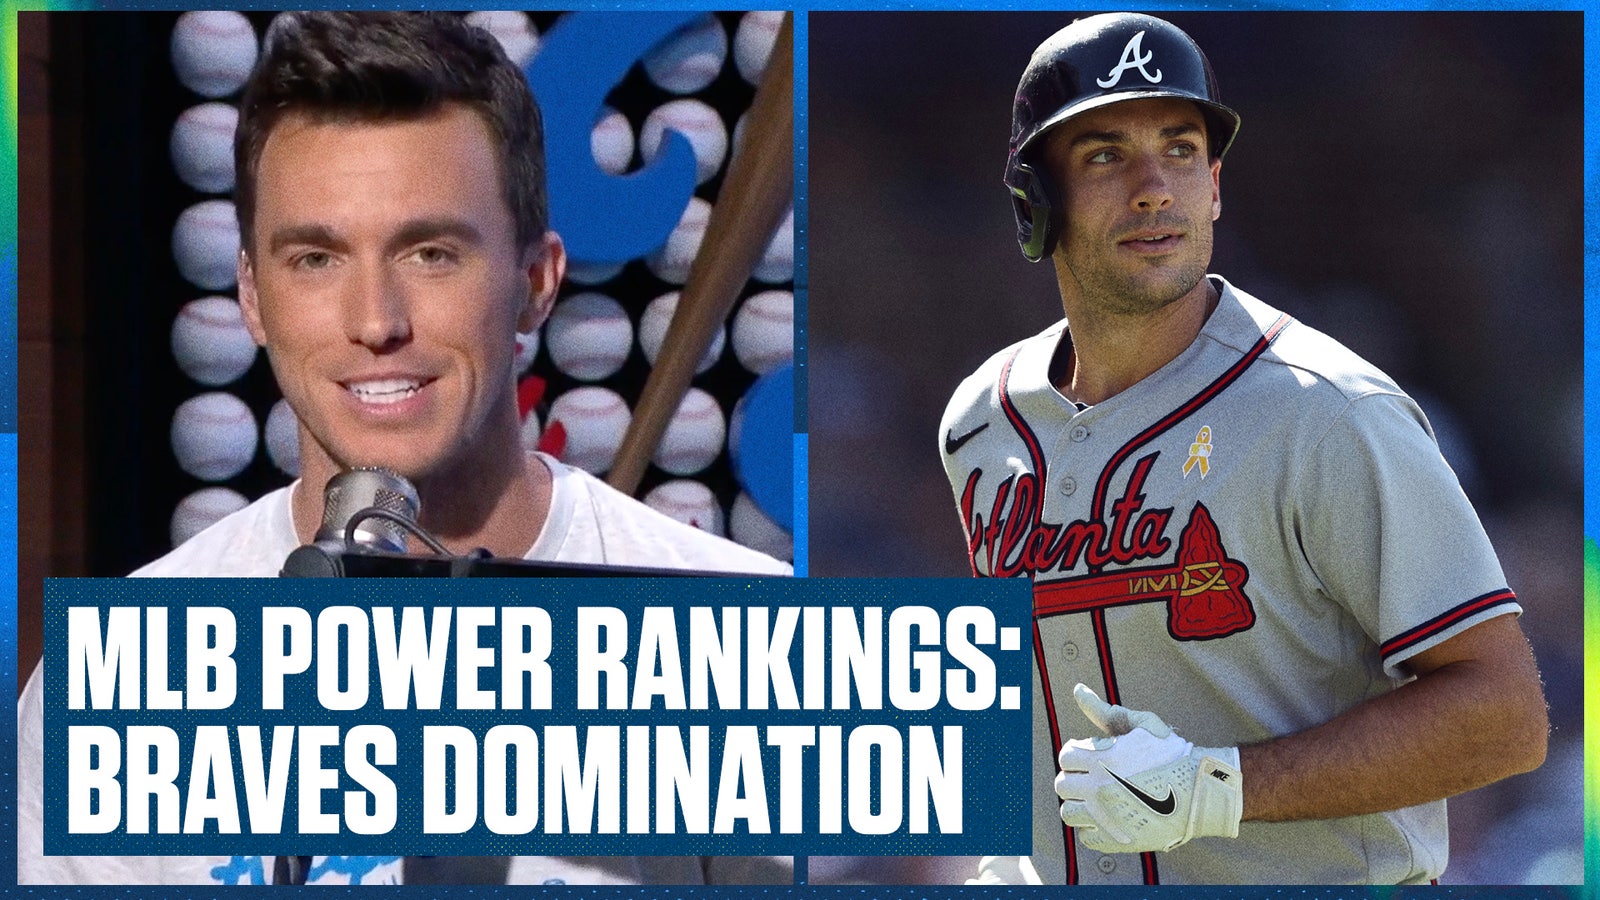 MLB Power Rankings: Braves cannot be stopped, Rangers struggle